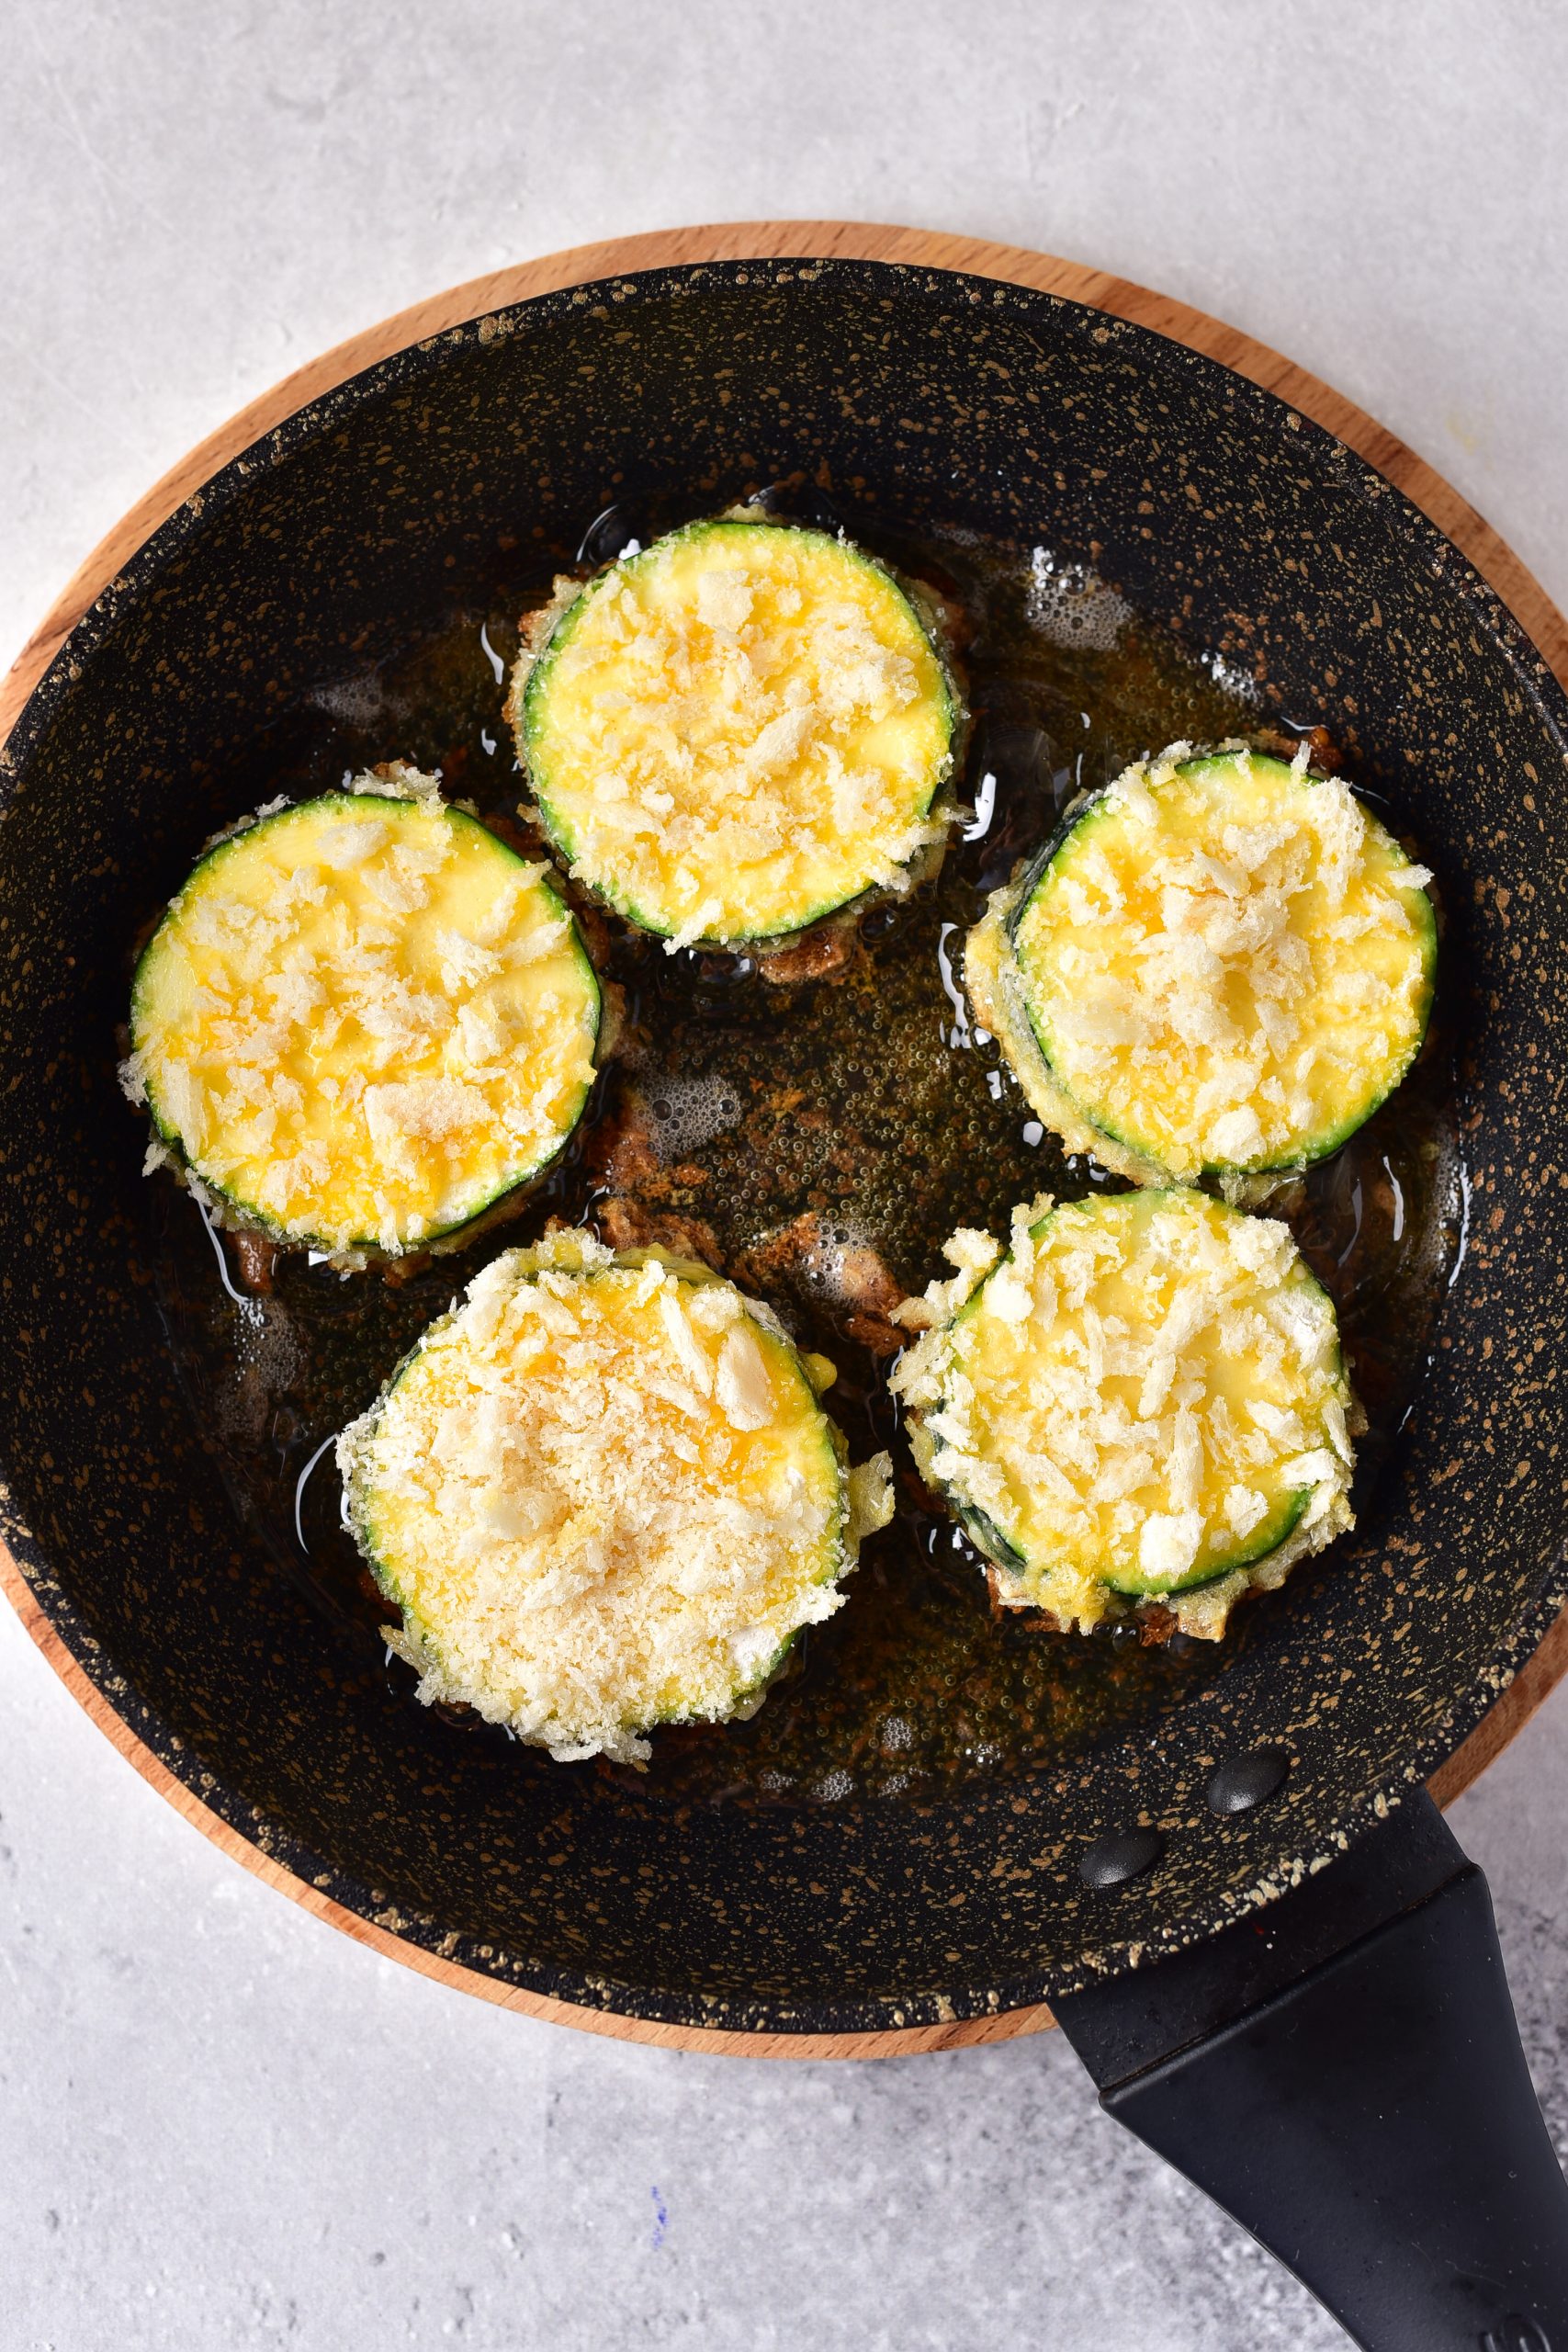 Fry the zucchini slices in the heated oil for 4-5 minutes until golden brown on both sides.